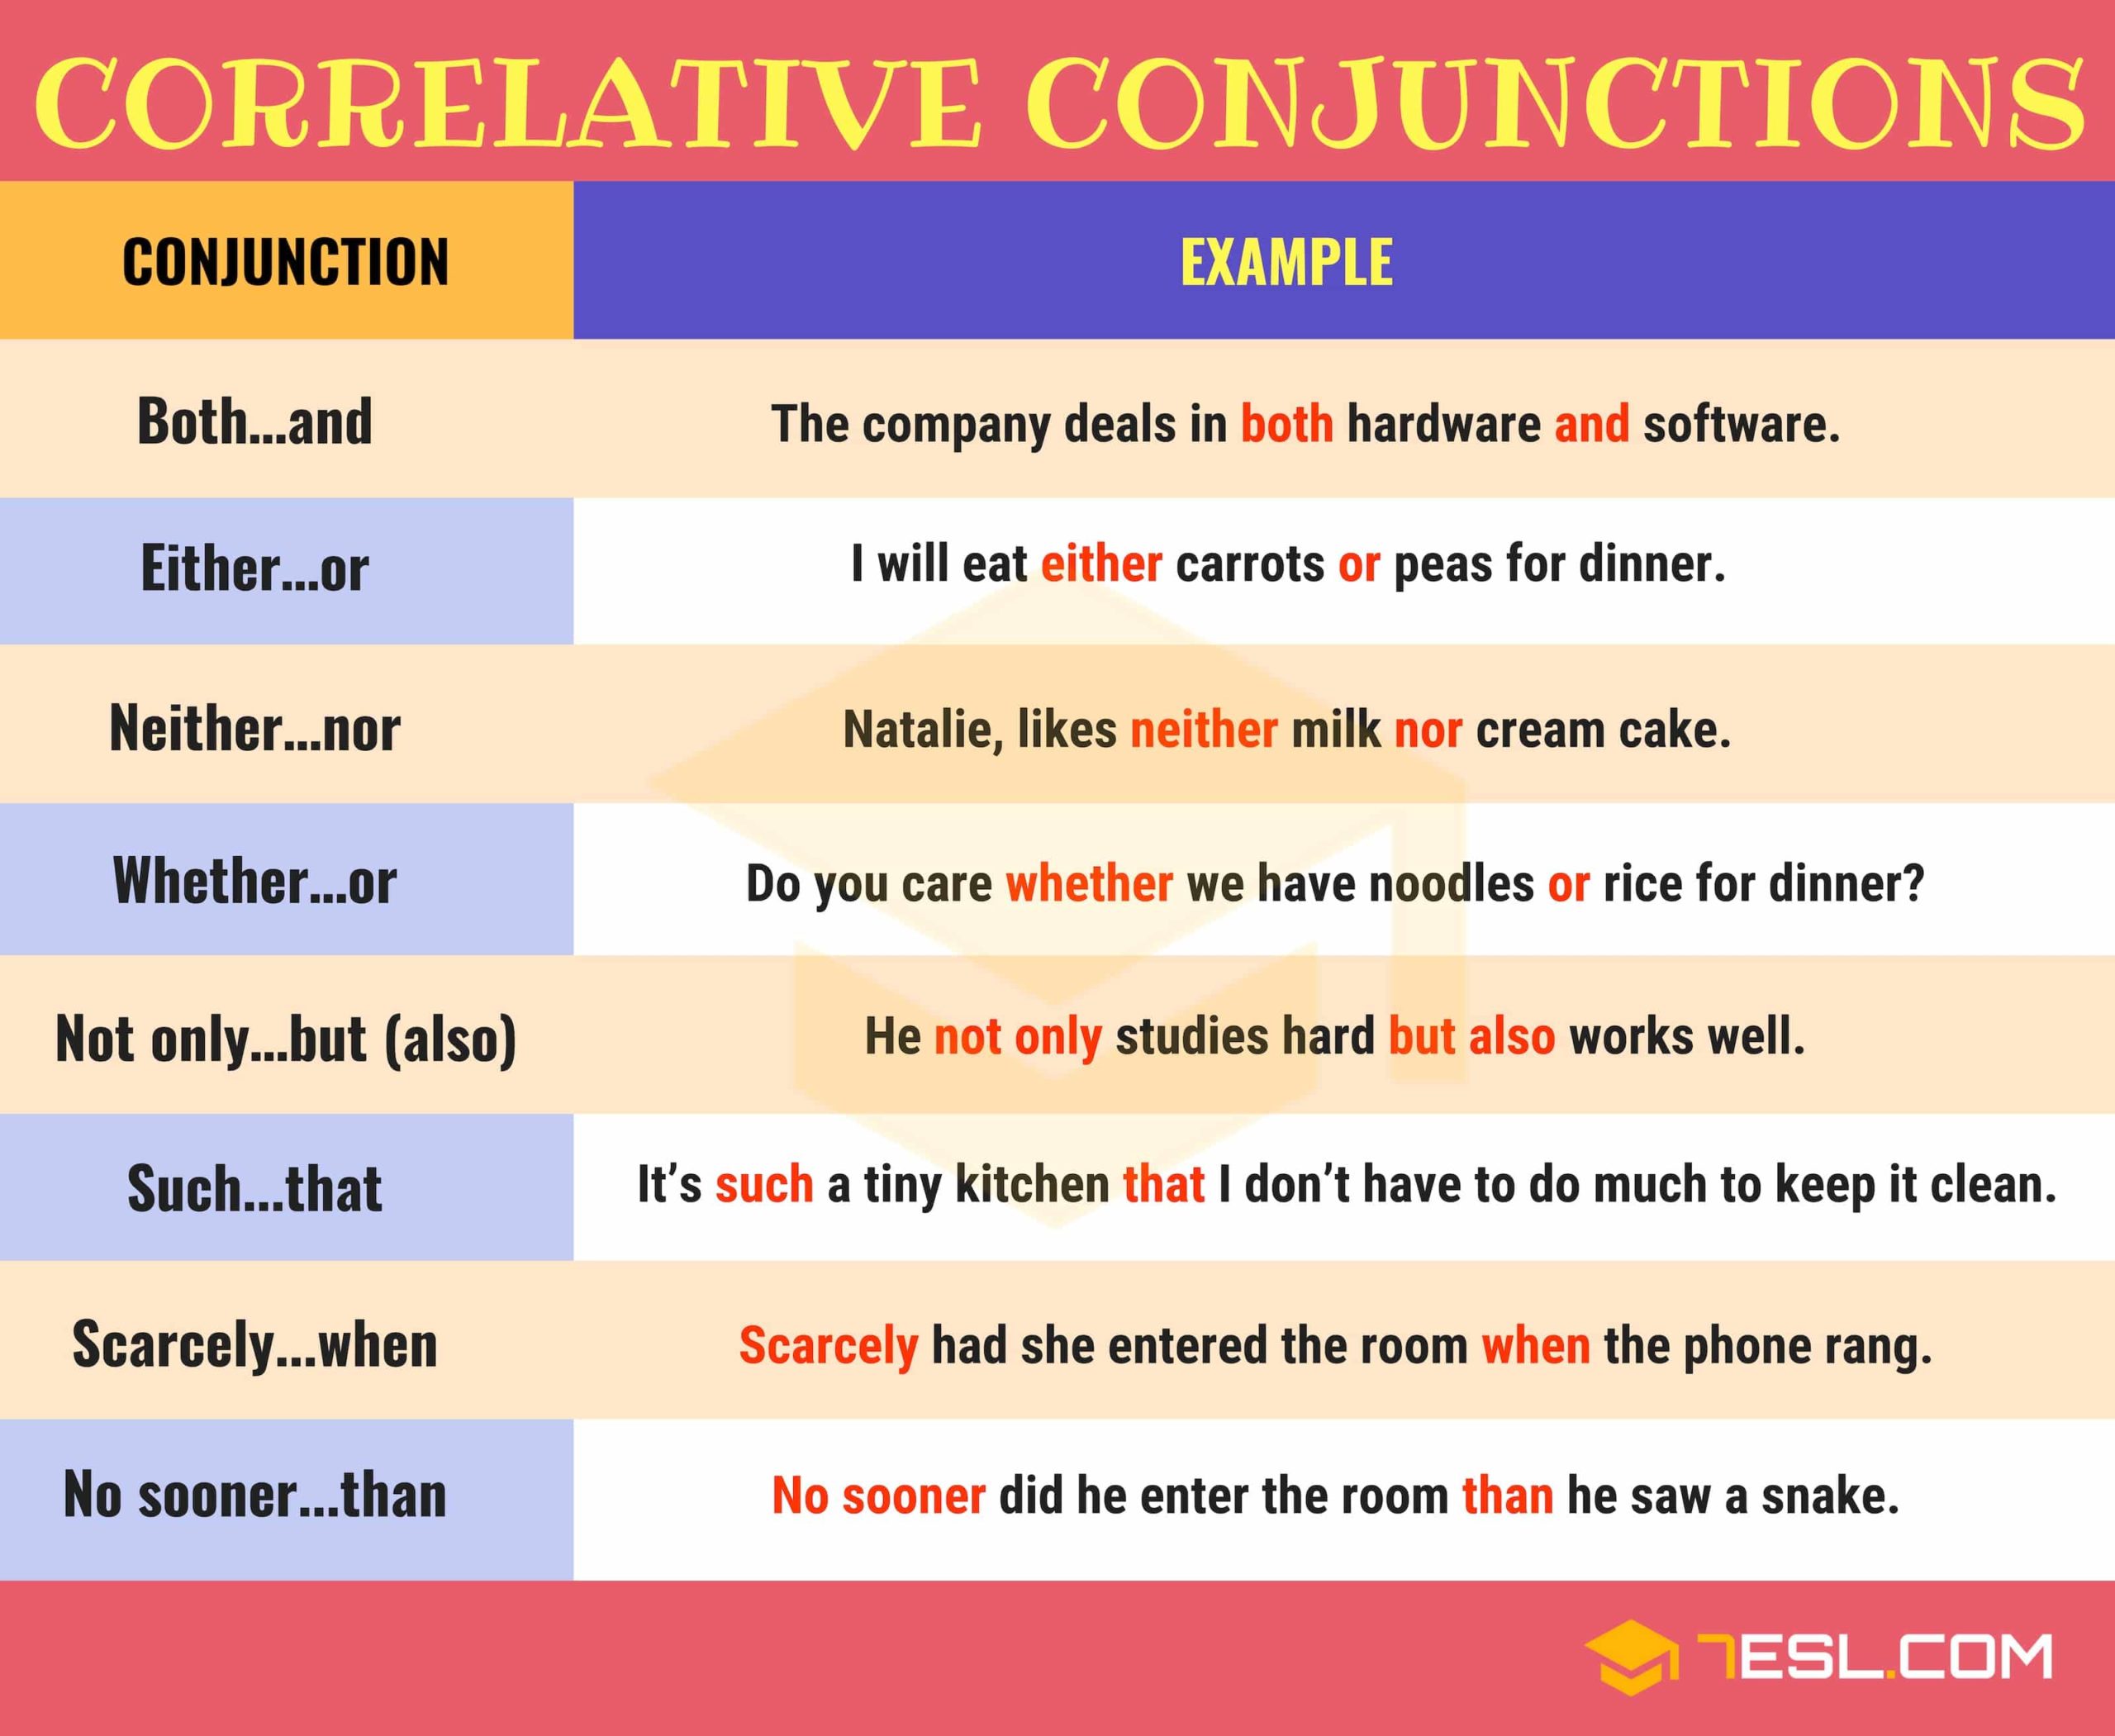 What Are The 10 Correlative Conjunctions